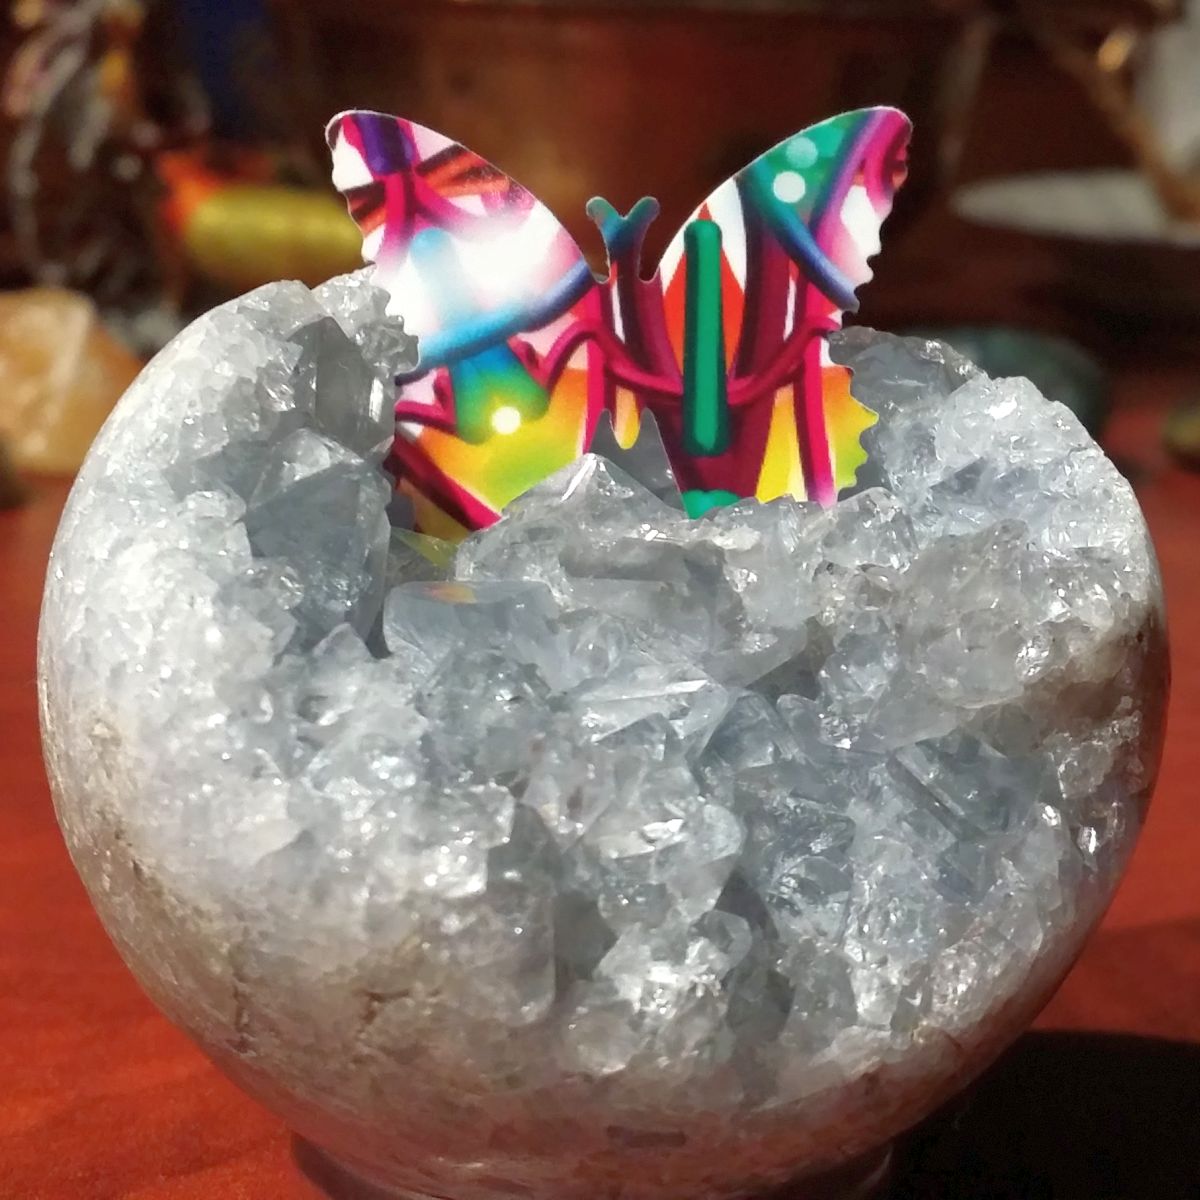 A butterfly soaks up the essence of celestite in a Rock The Butterfly Essence session.